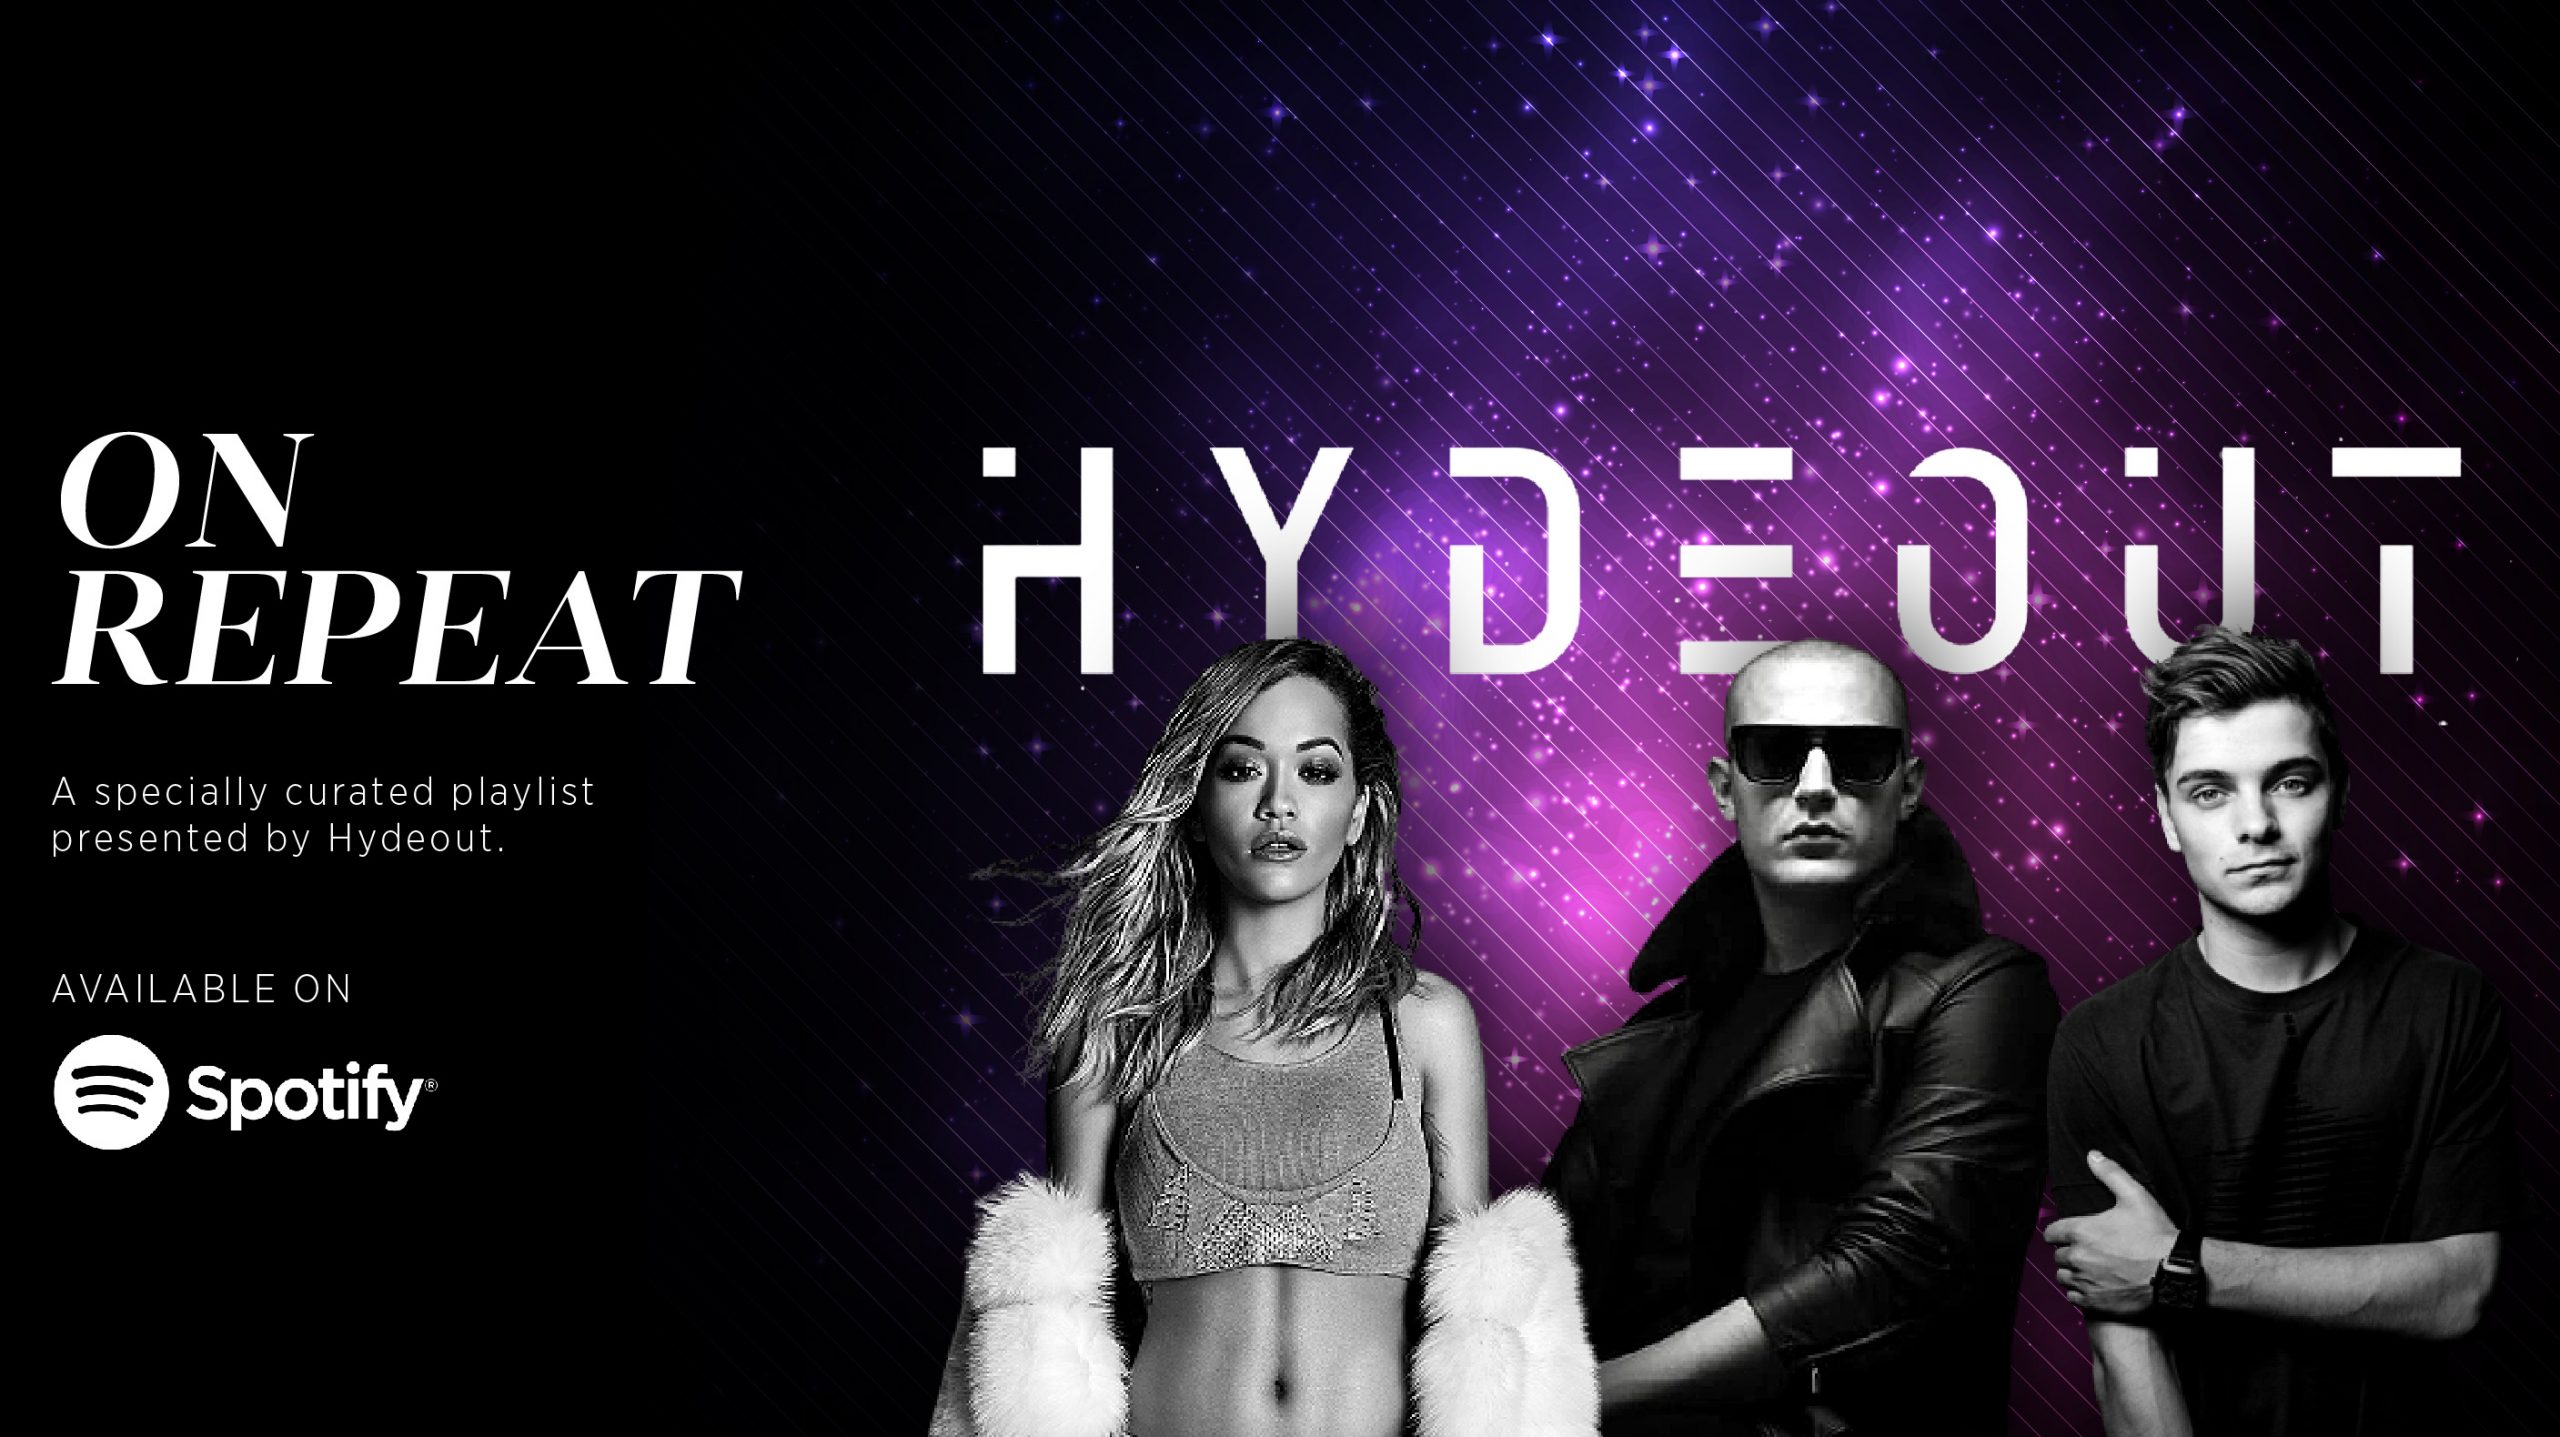 Hydeout: A New Virtual Concert Experience, Is Changing The Way We Experience Music In 2021